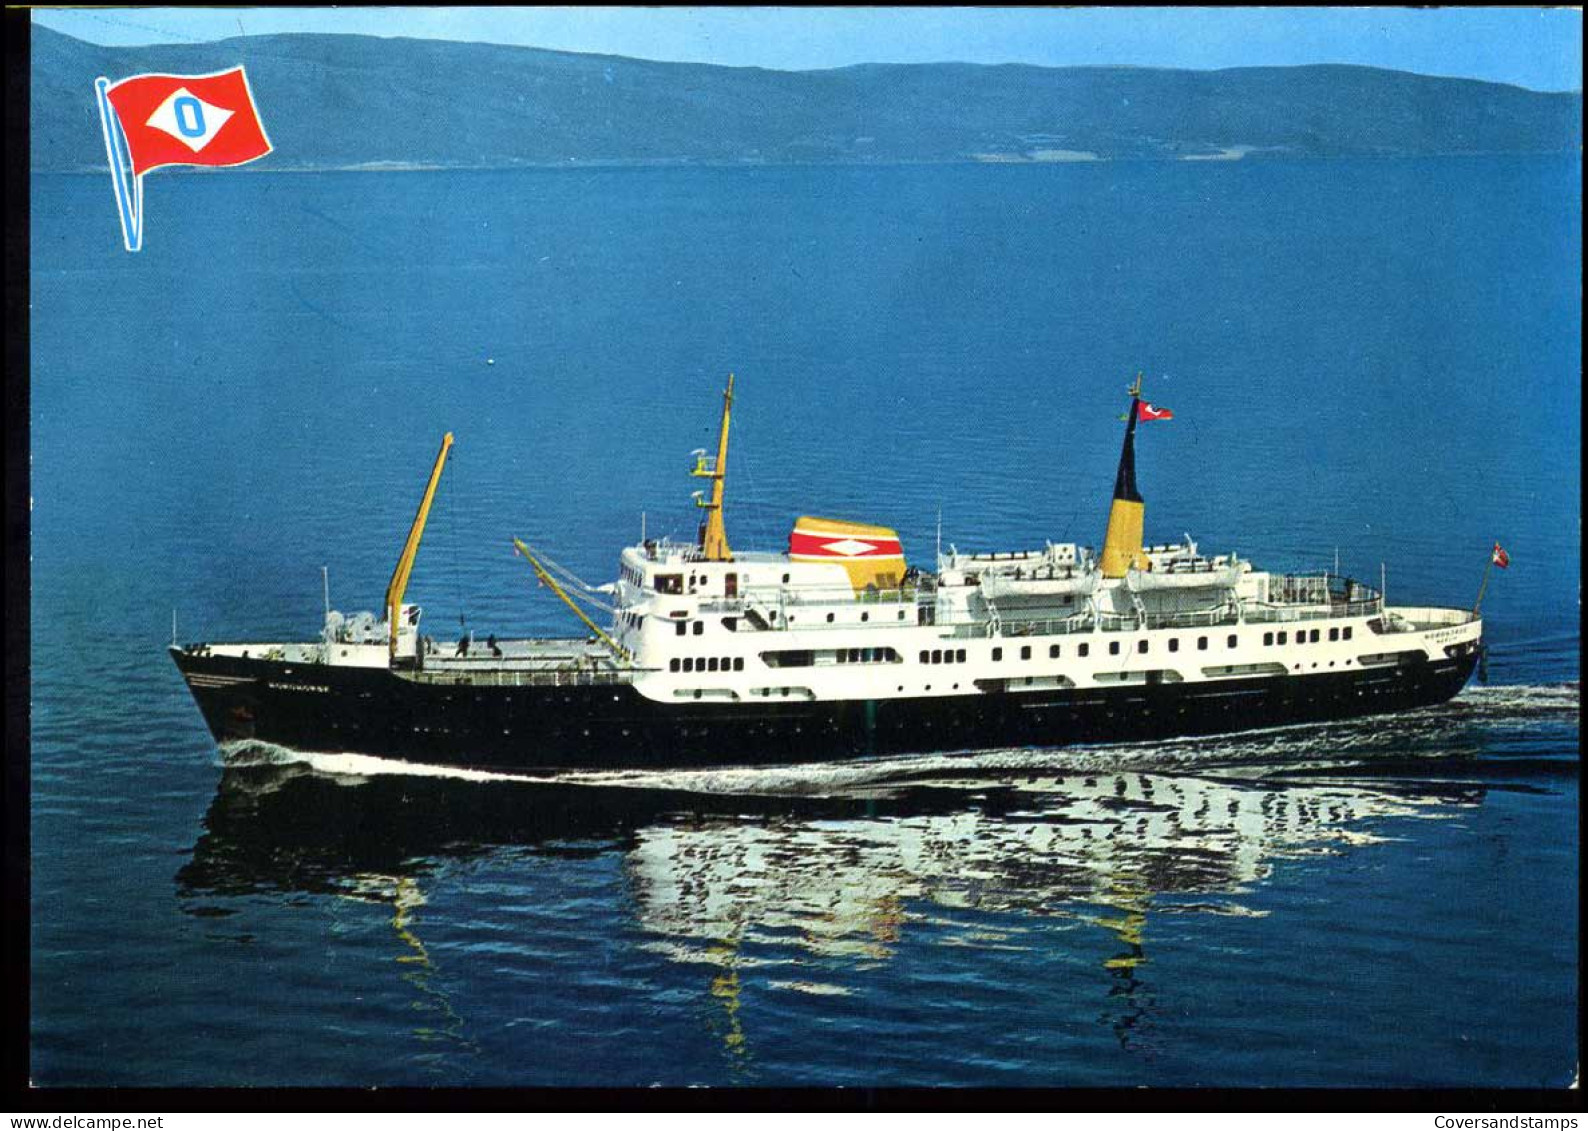 Norway - Post Card "The Express Coastal Liner 'M/S Nordnorgei'" - Covers & Documents